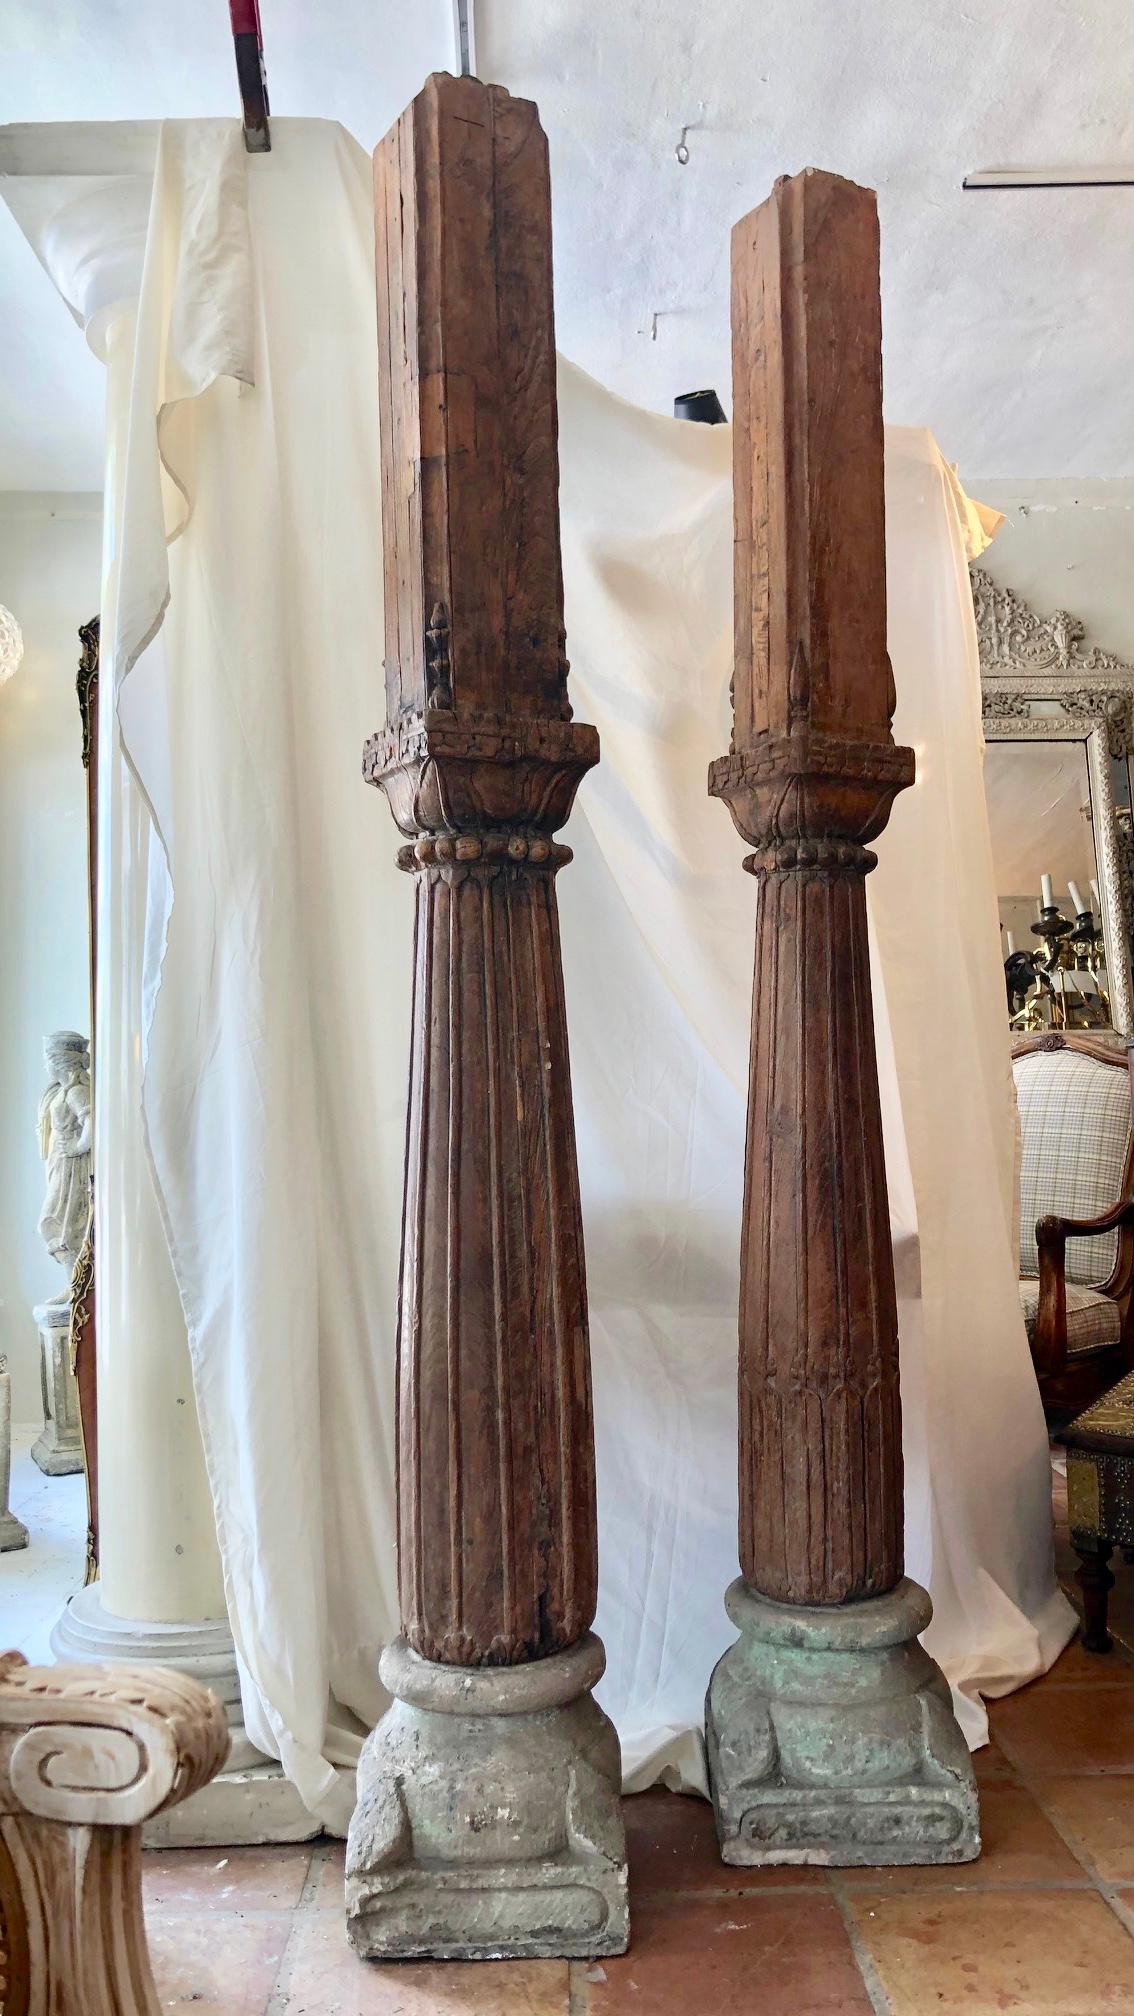 These are an unusual pair of antique wood with stone base pillars or columns.
The scale is large, important, and heavy
They are solid oak with some fine carvings.
There is a cut out to one side with a lip to the top. Indicating
that they were